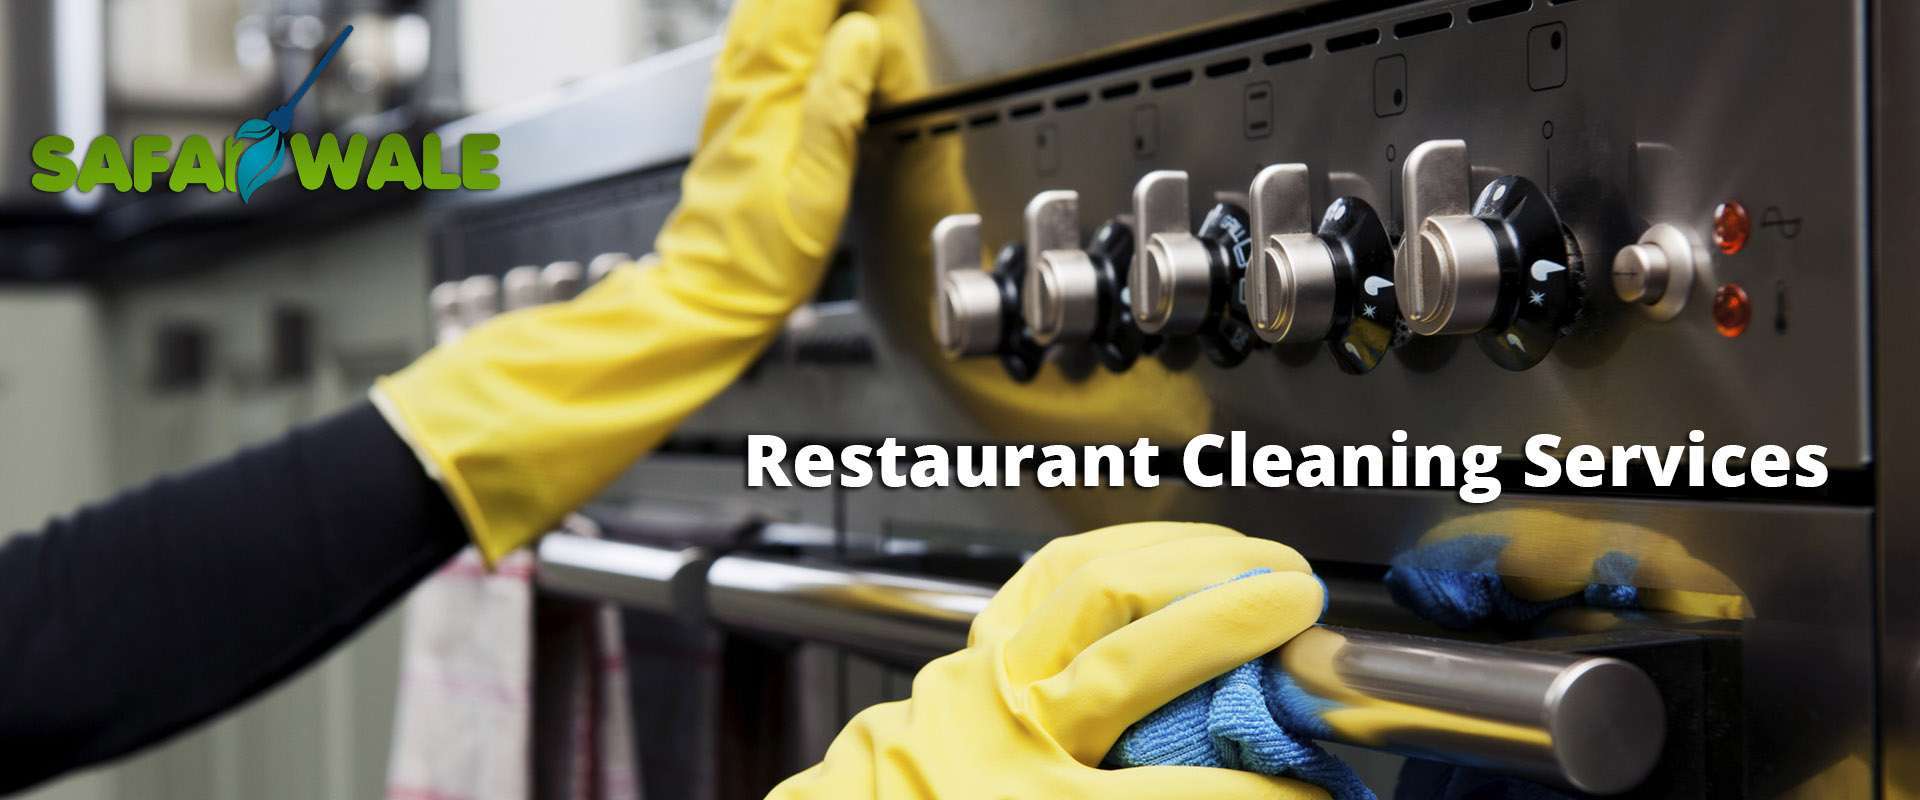 restaurant cleaning services in Guwahati